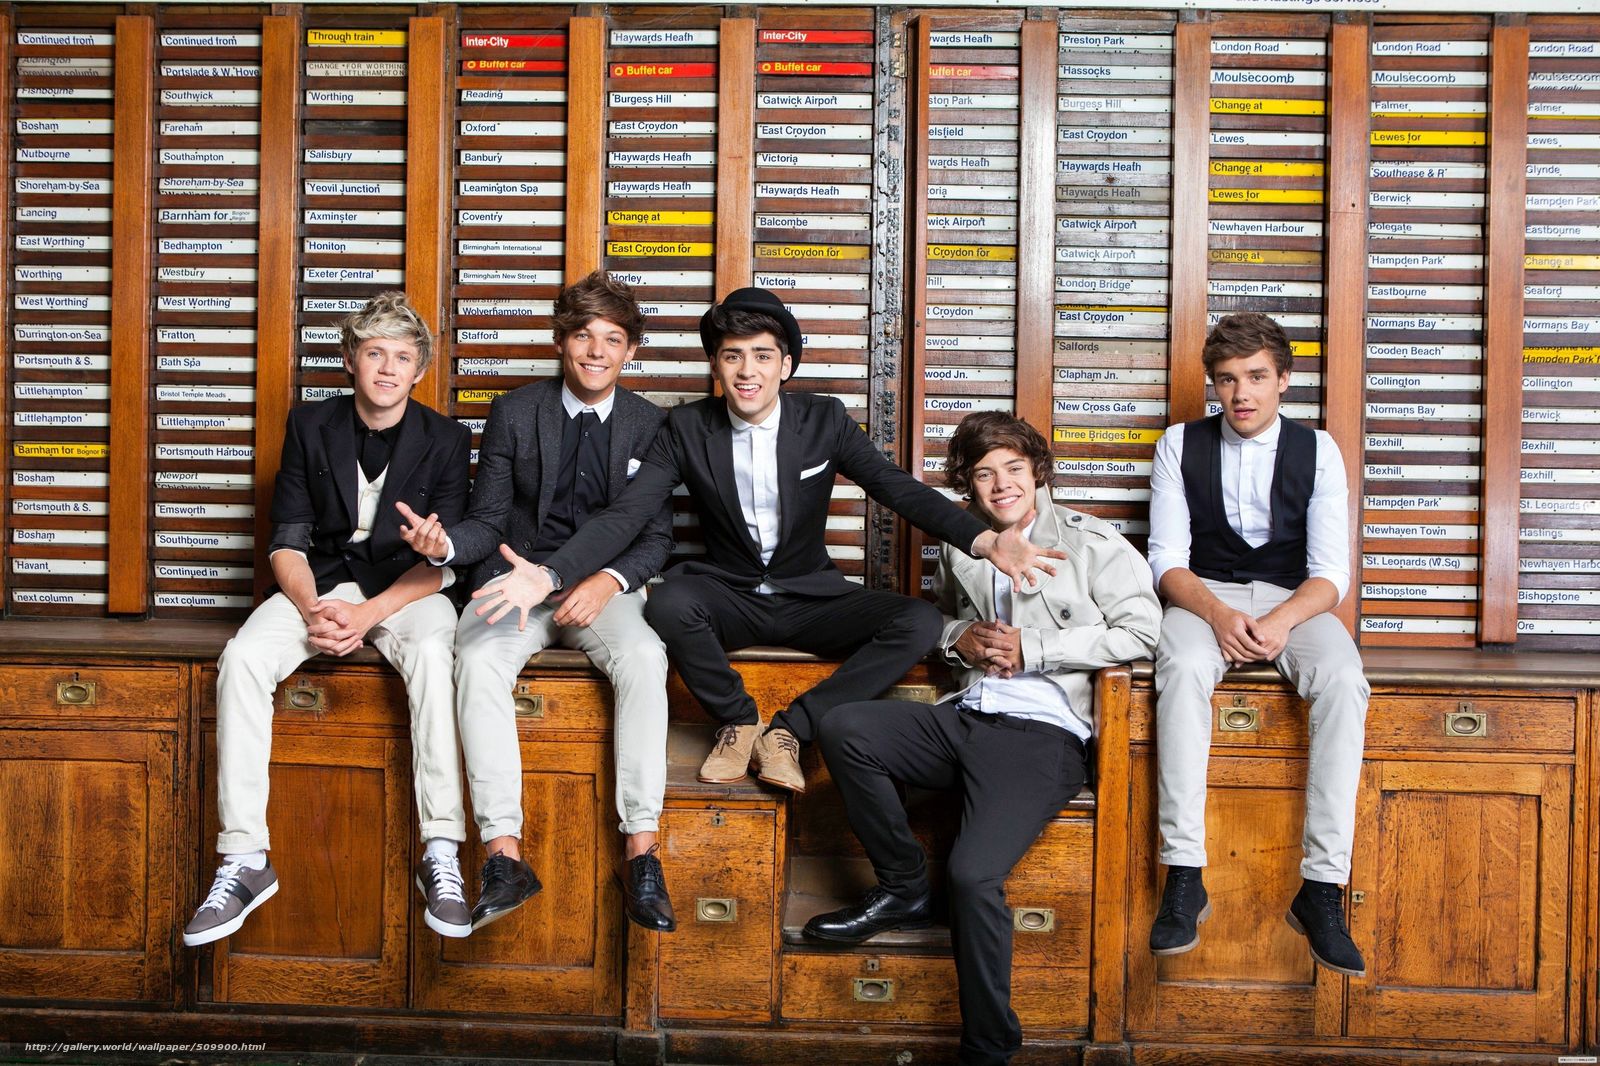 Download Wallpaper One Direction, Niall Horan, Harry - Take Me Home Album Photoshoot - HD Wallpaper 